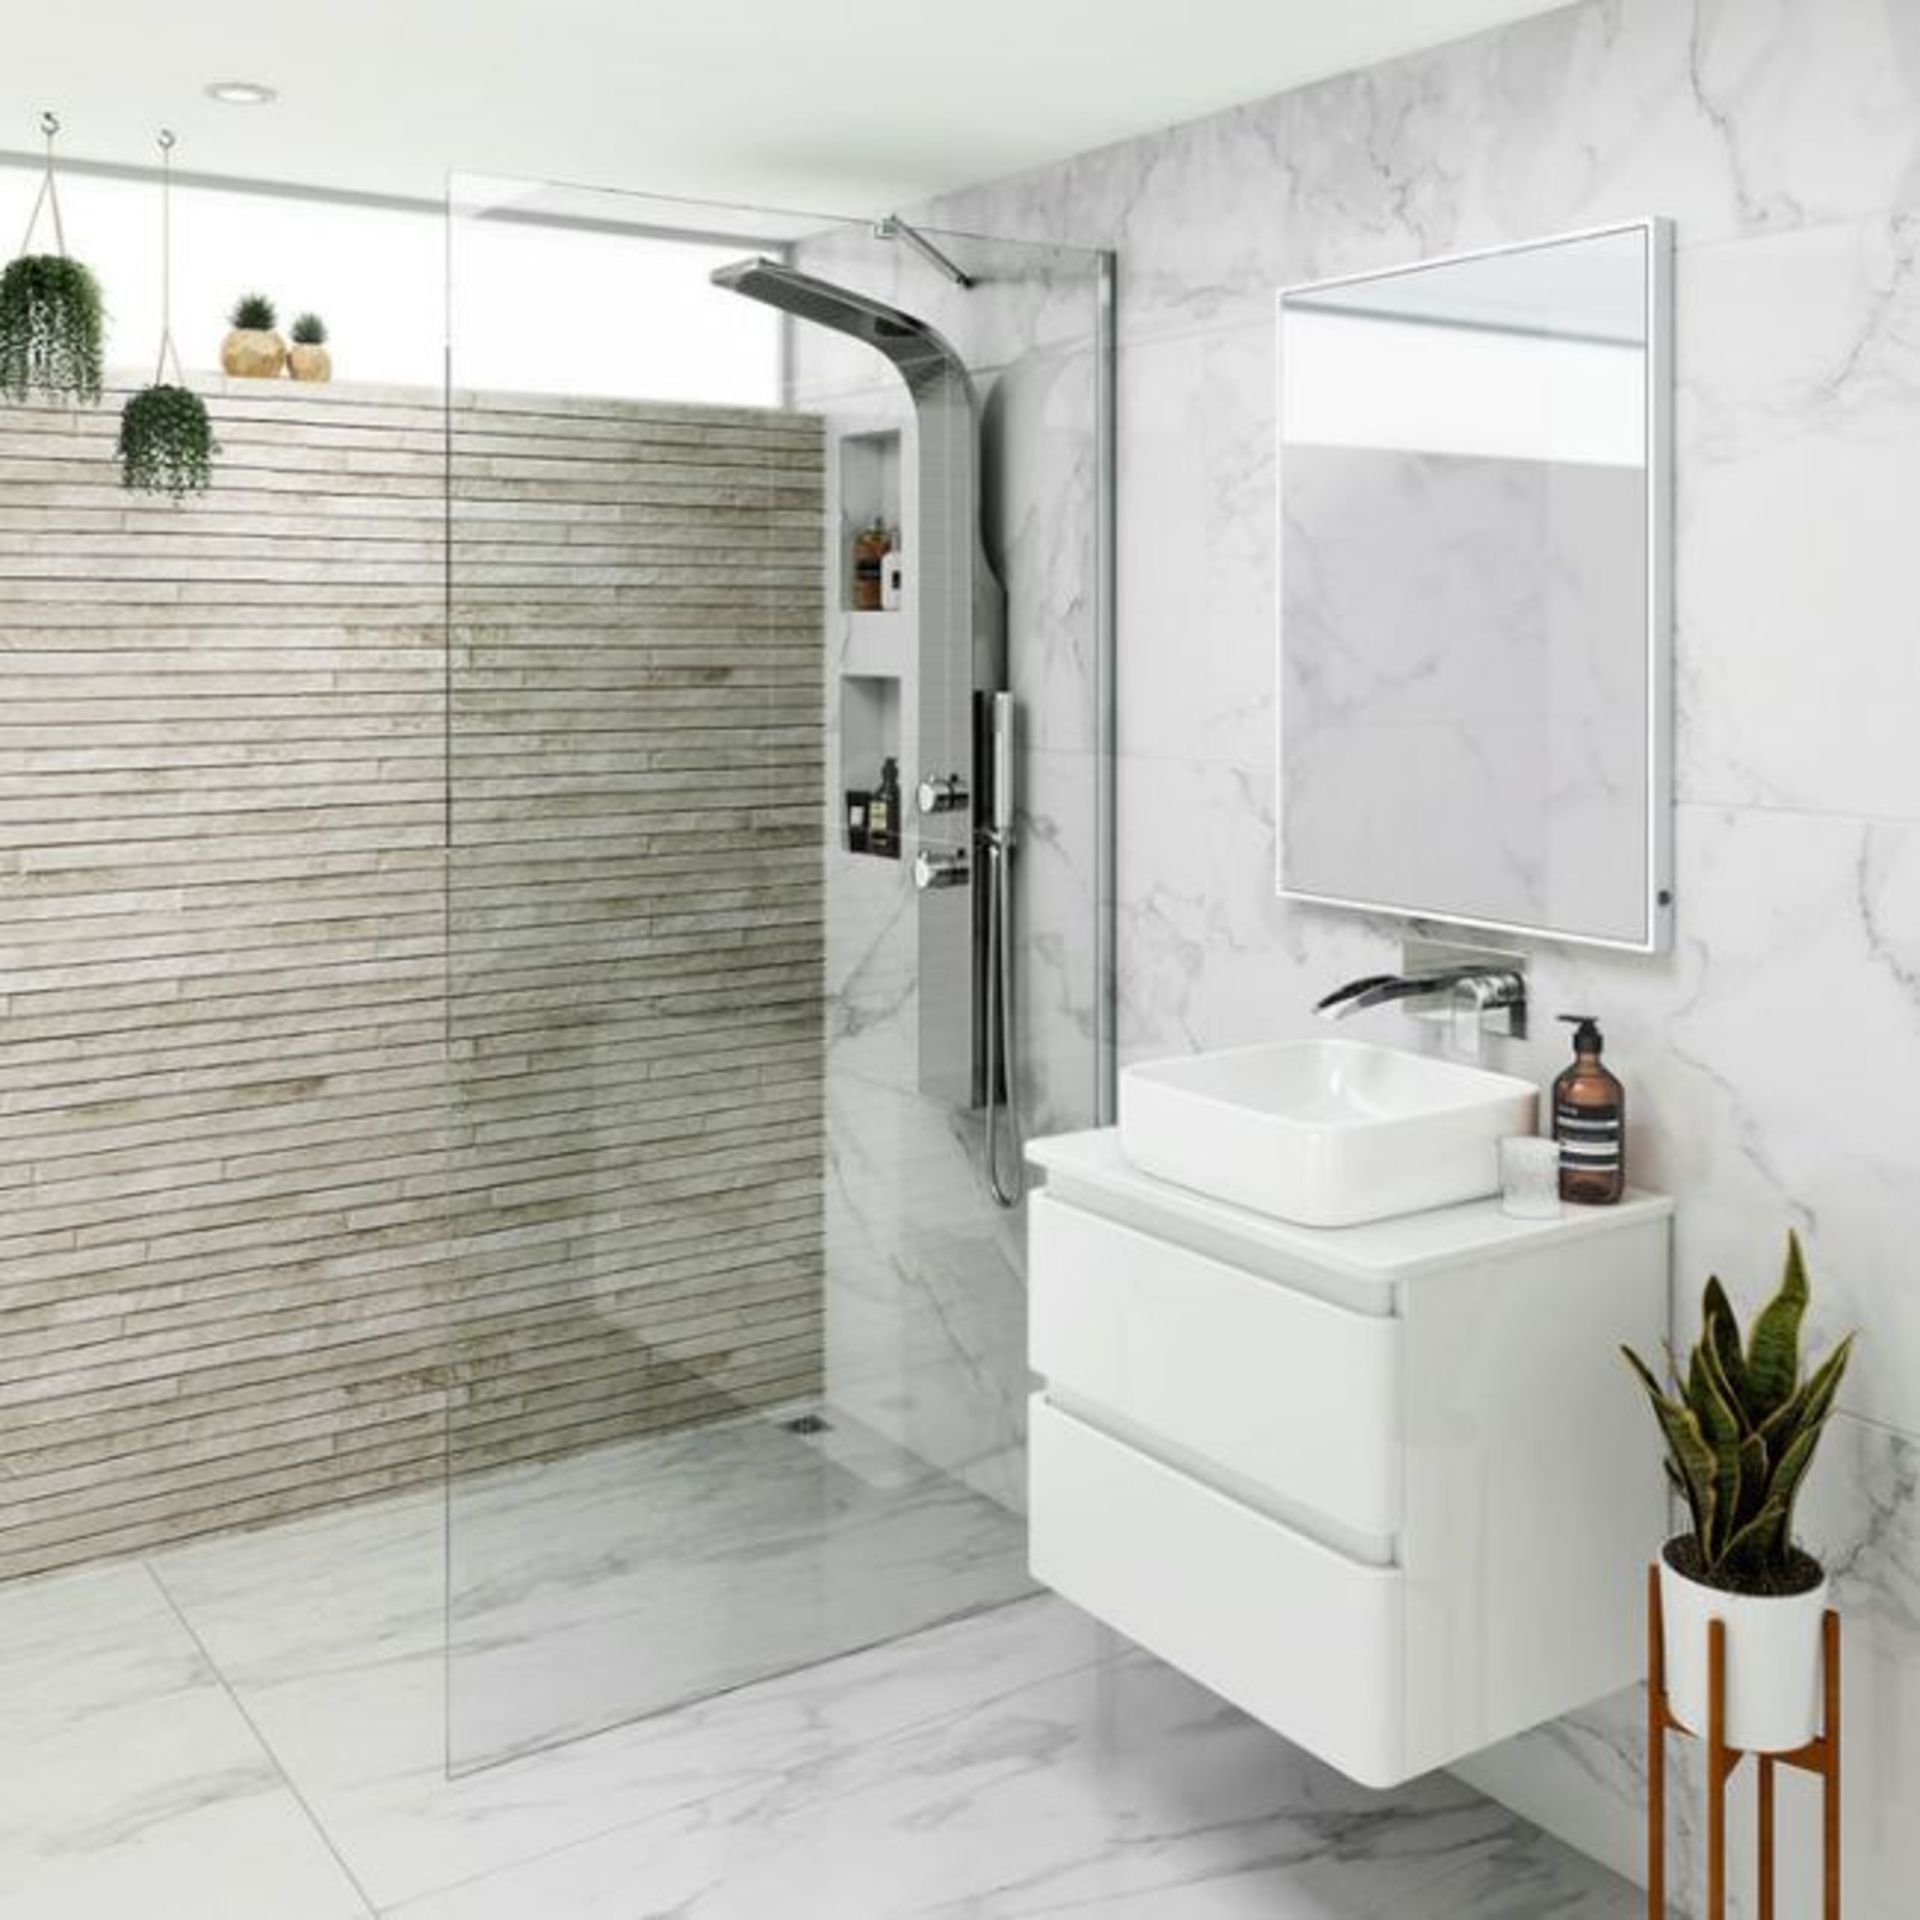 New Twyford's 1000mm - 8mm - Premium Easy clean Wet room Panel. RRP £499.99.8mm Easy clean ... - Image 2 of 2